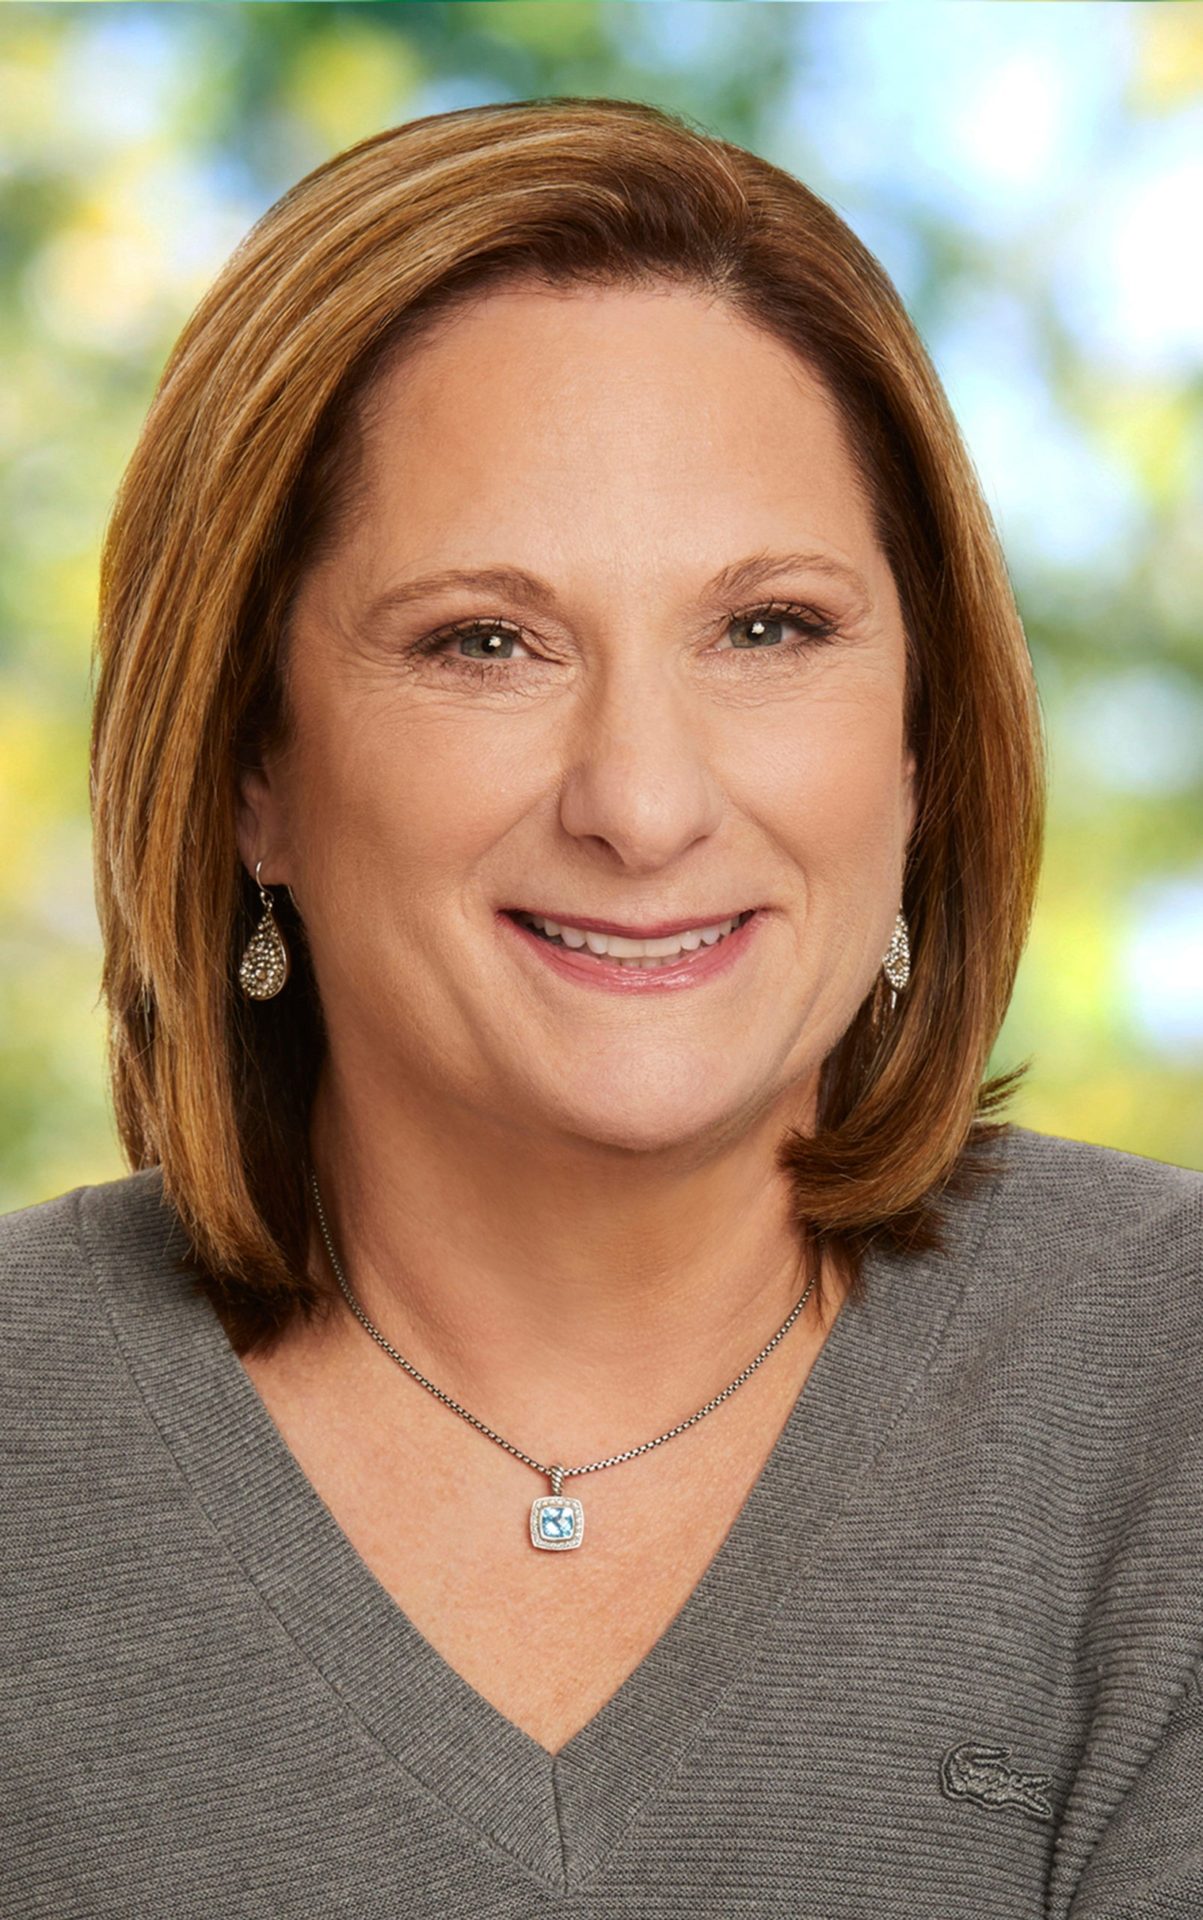 Susan Arnold named Chairman of the Board of The Walt Disney Company